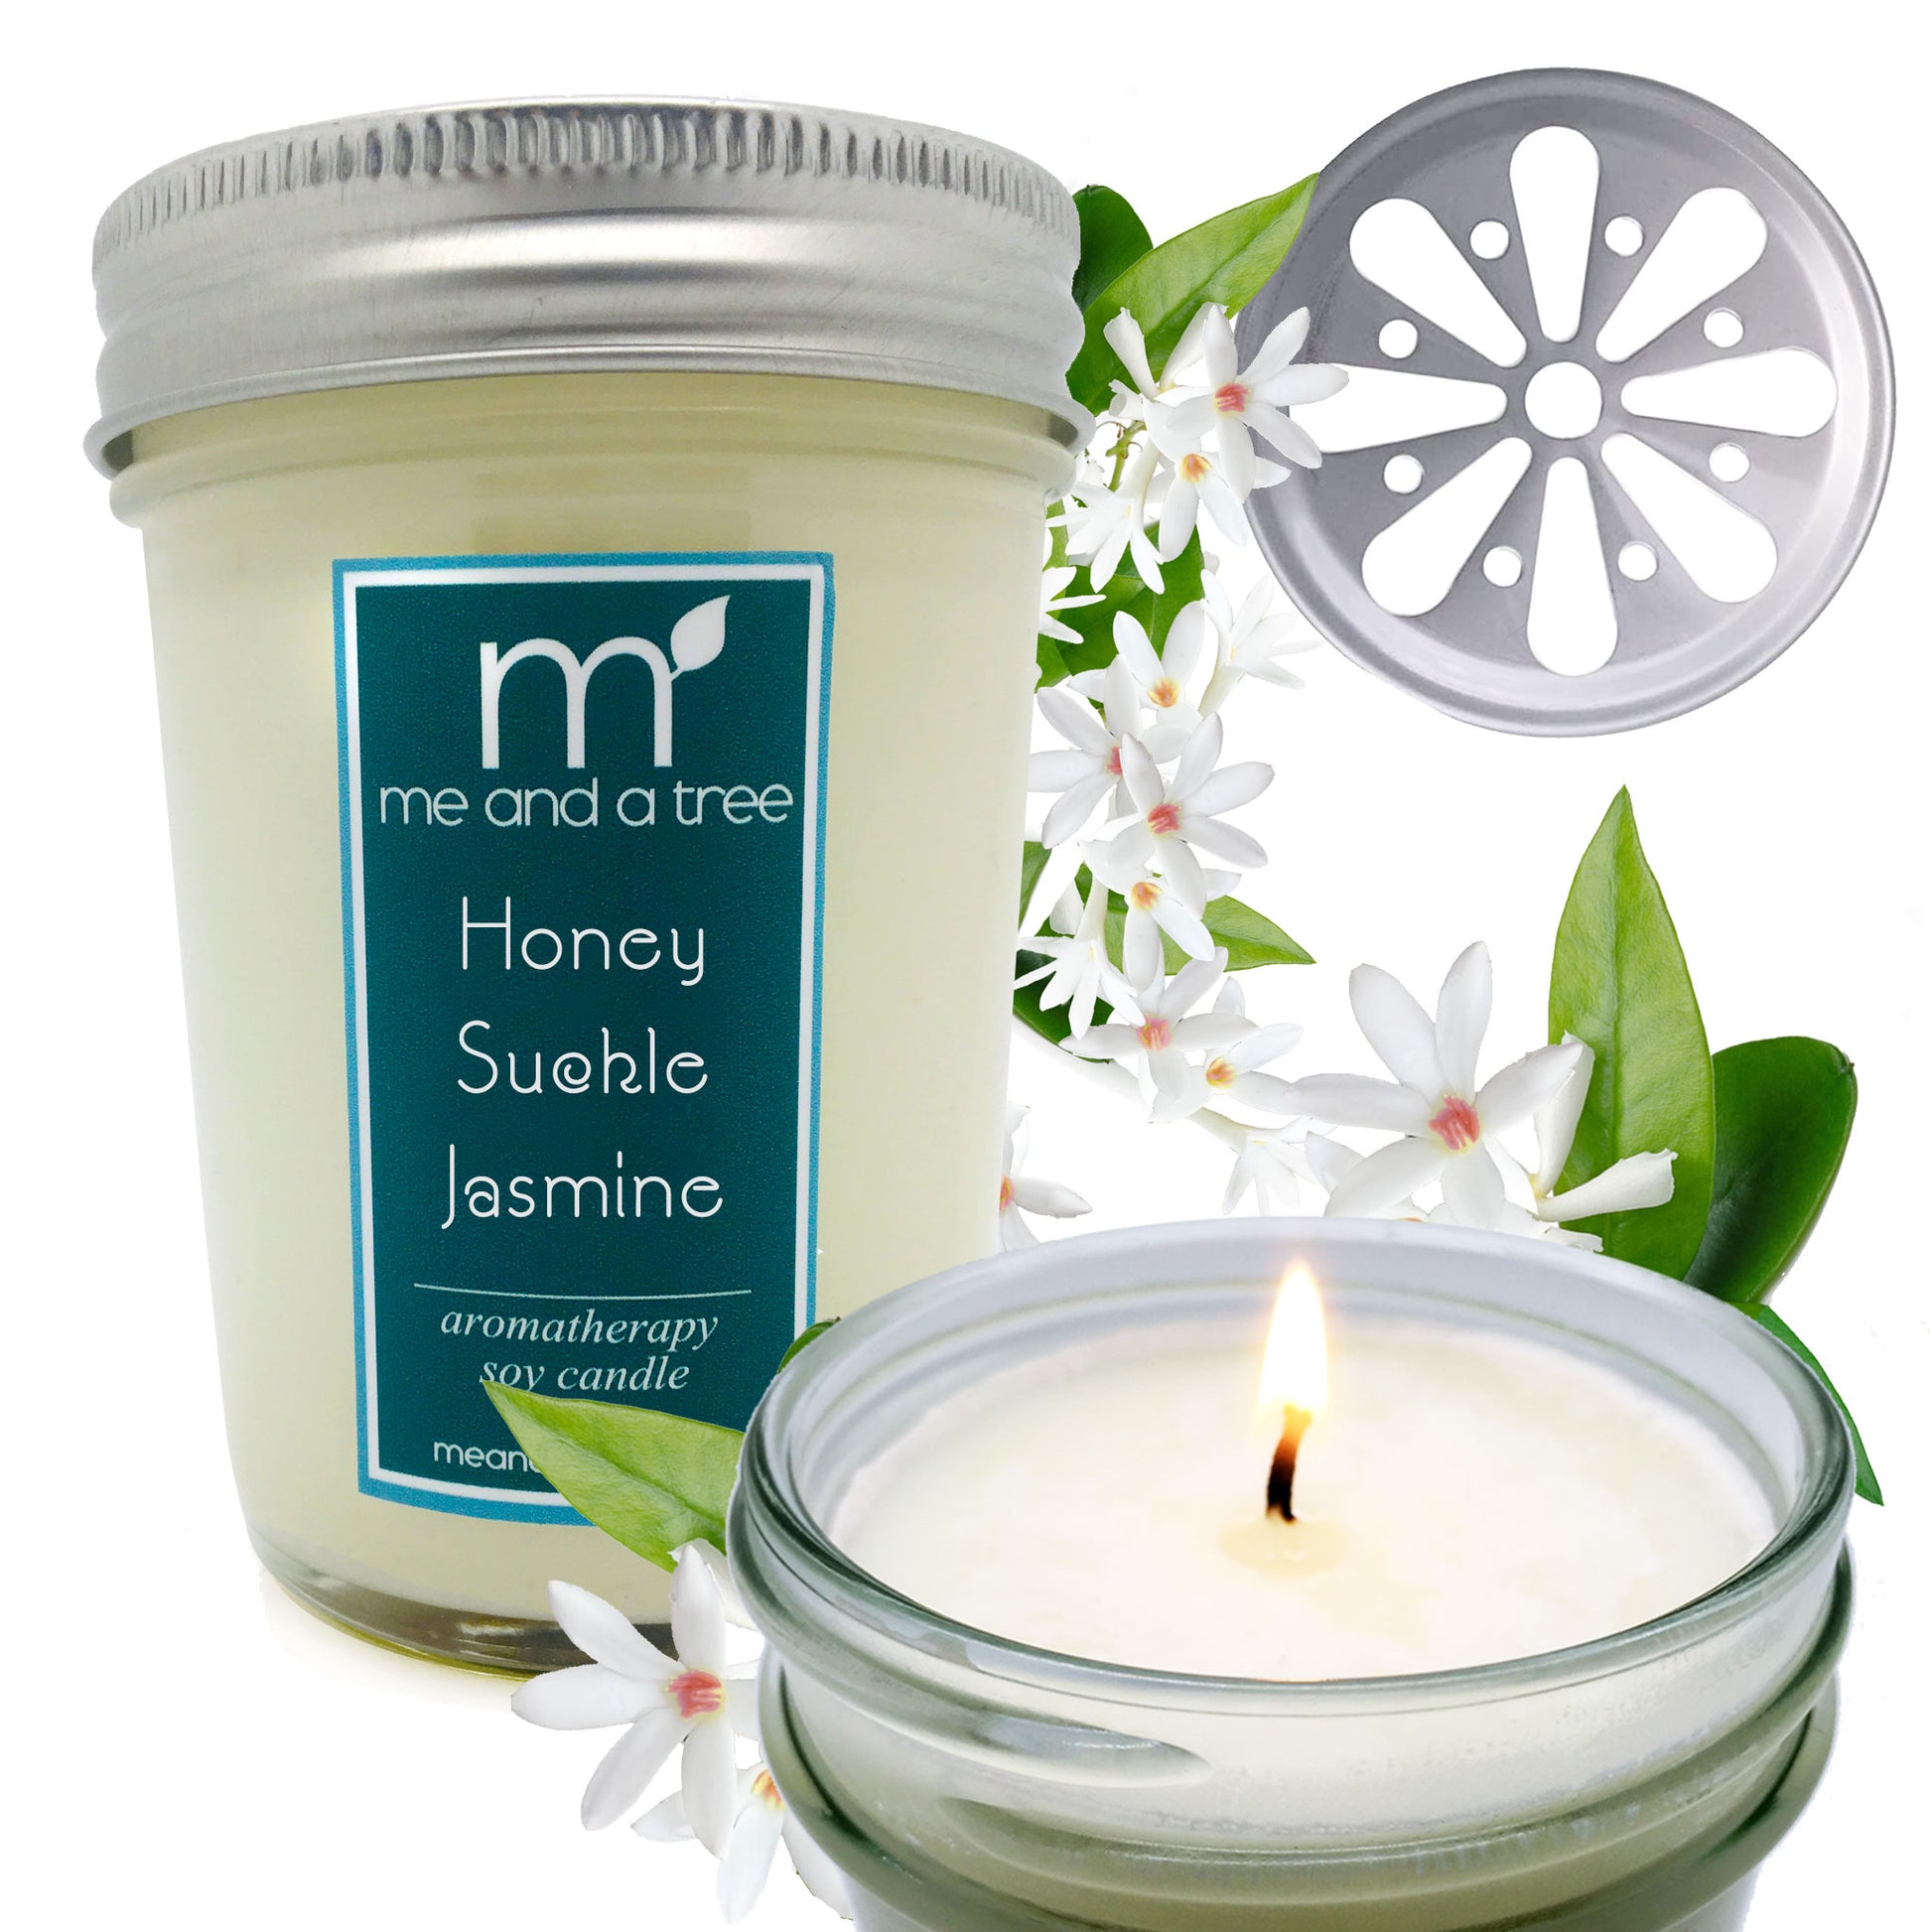 Best Honeysuckle Jasmine Soy Candle - Daisy Glow Night Time Lid - Romantic Massage - Calming Warm- Beautifully Floral Scented - Nail & Perfume - Hair Shin